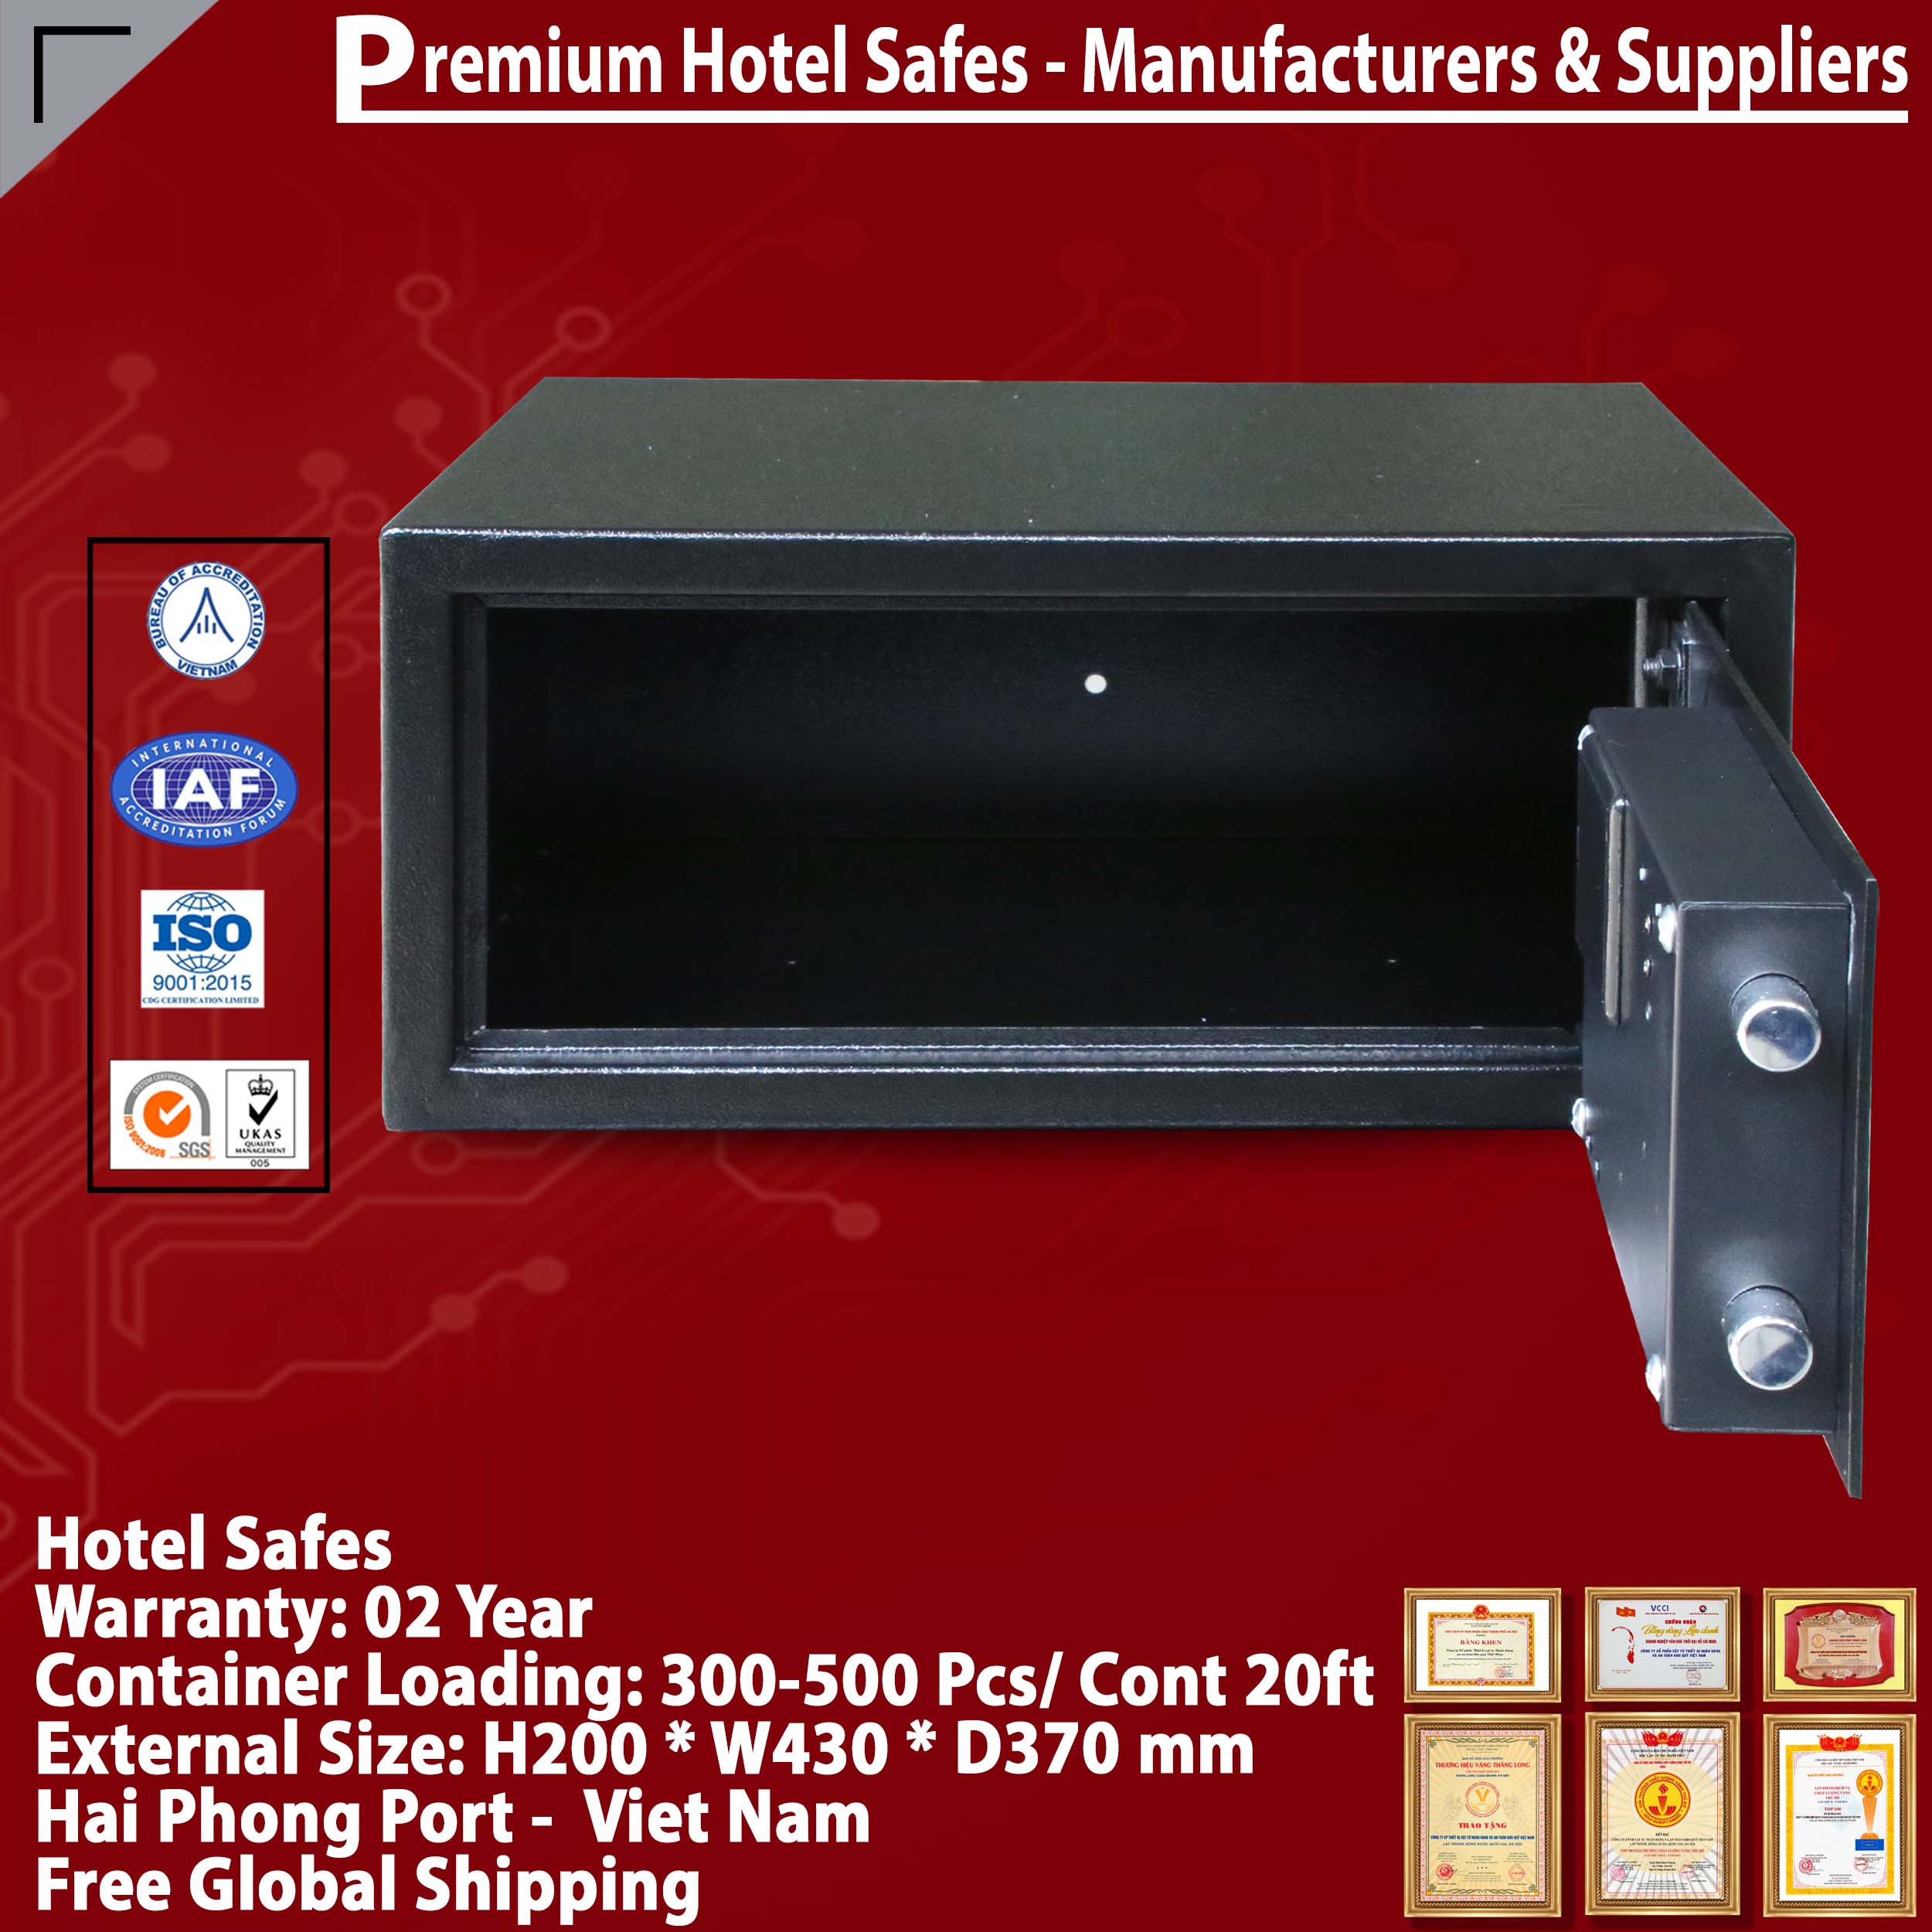 Fireproof Hotel Room Security Made In Viet Nam